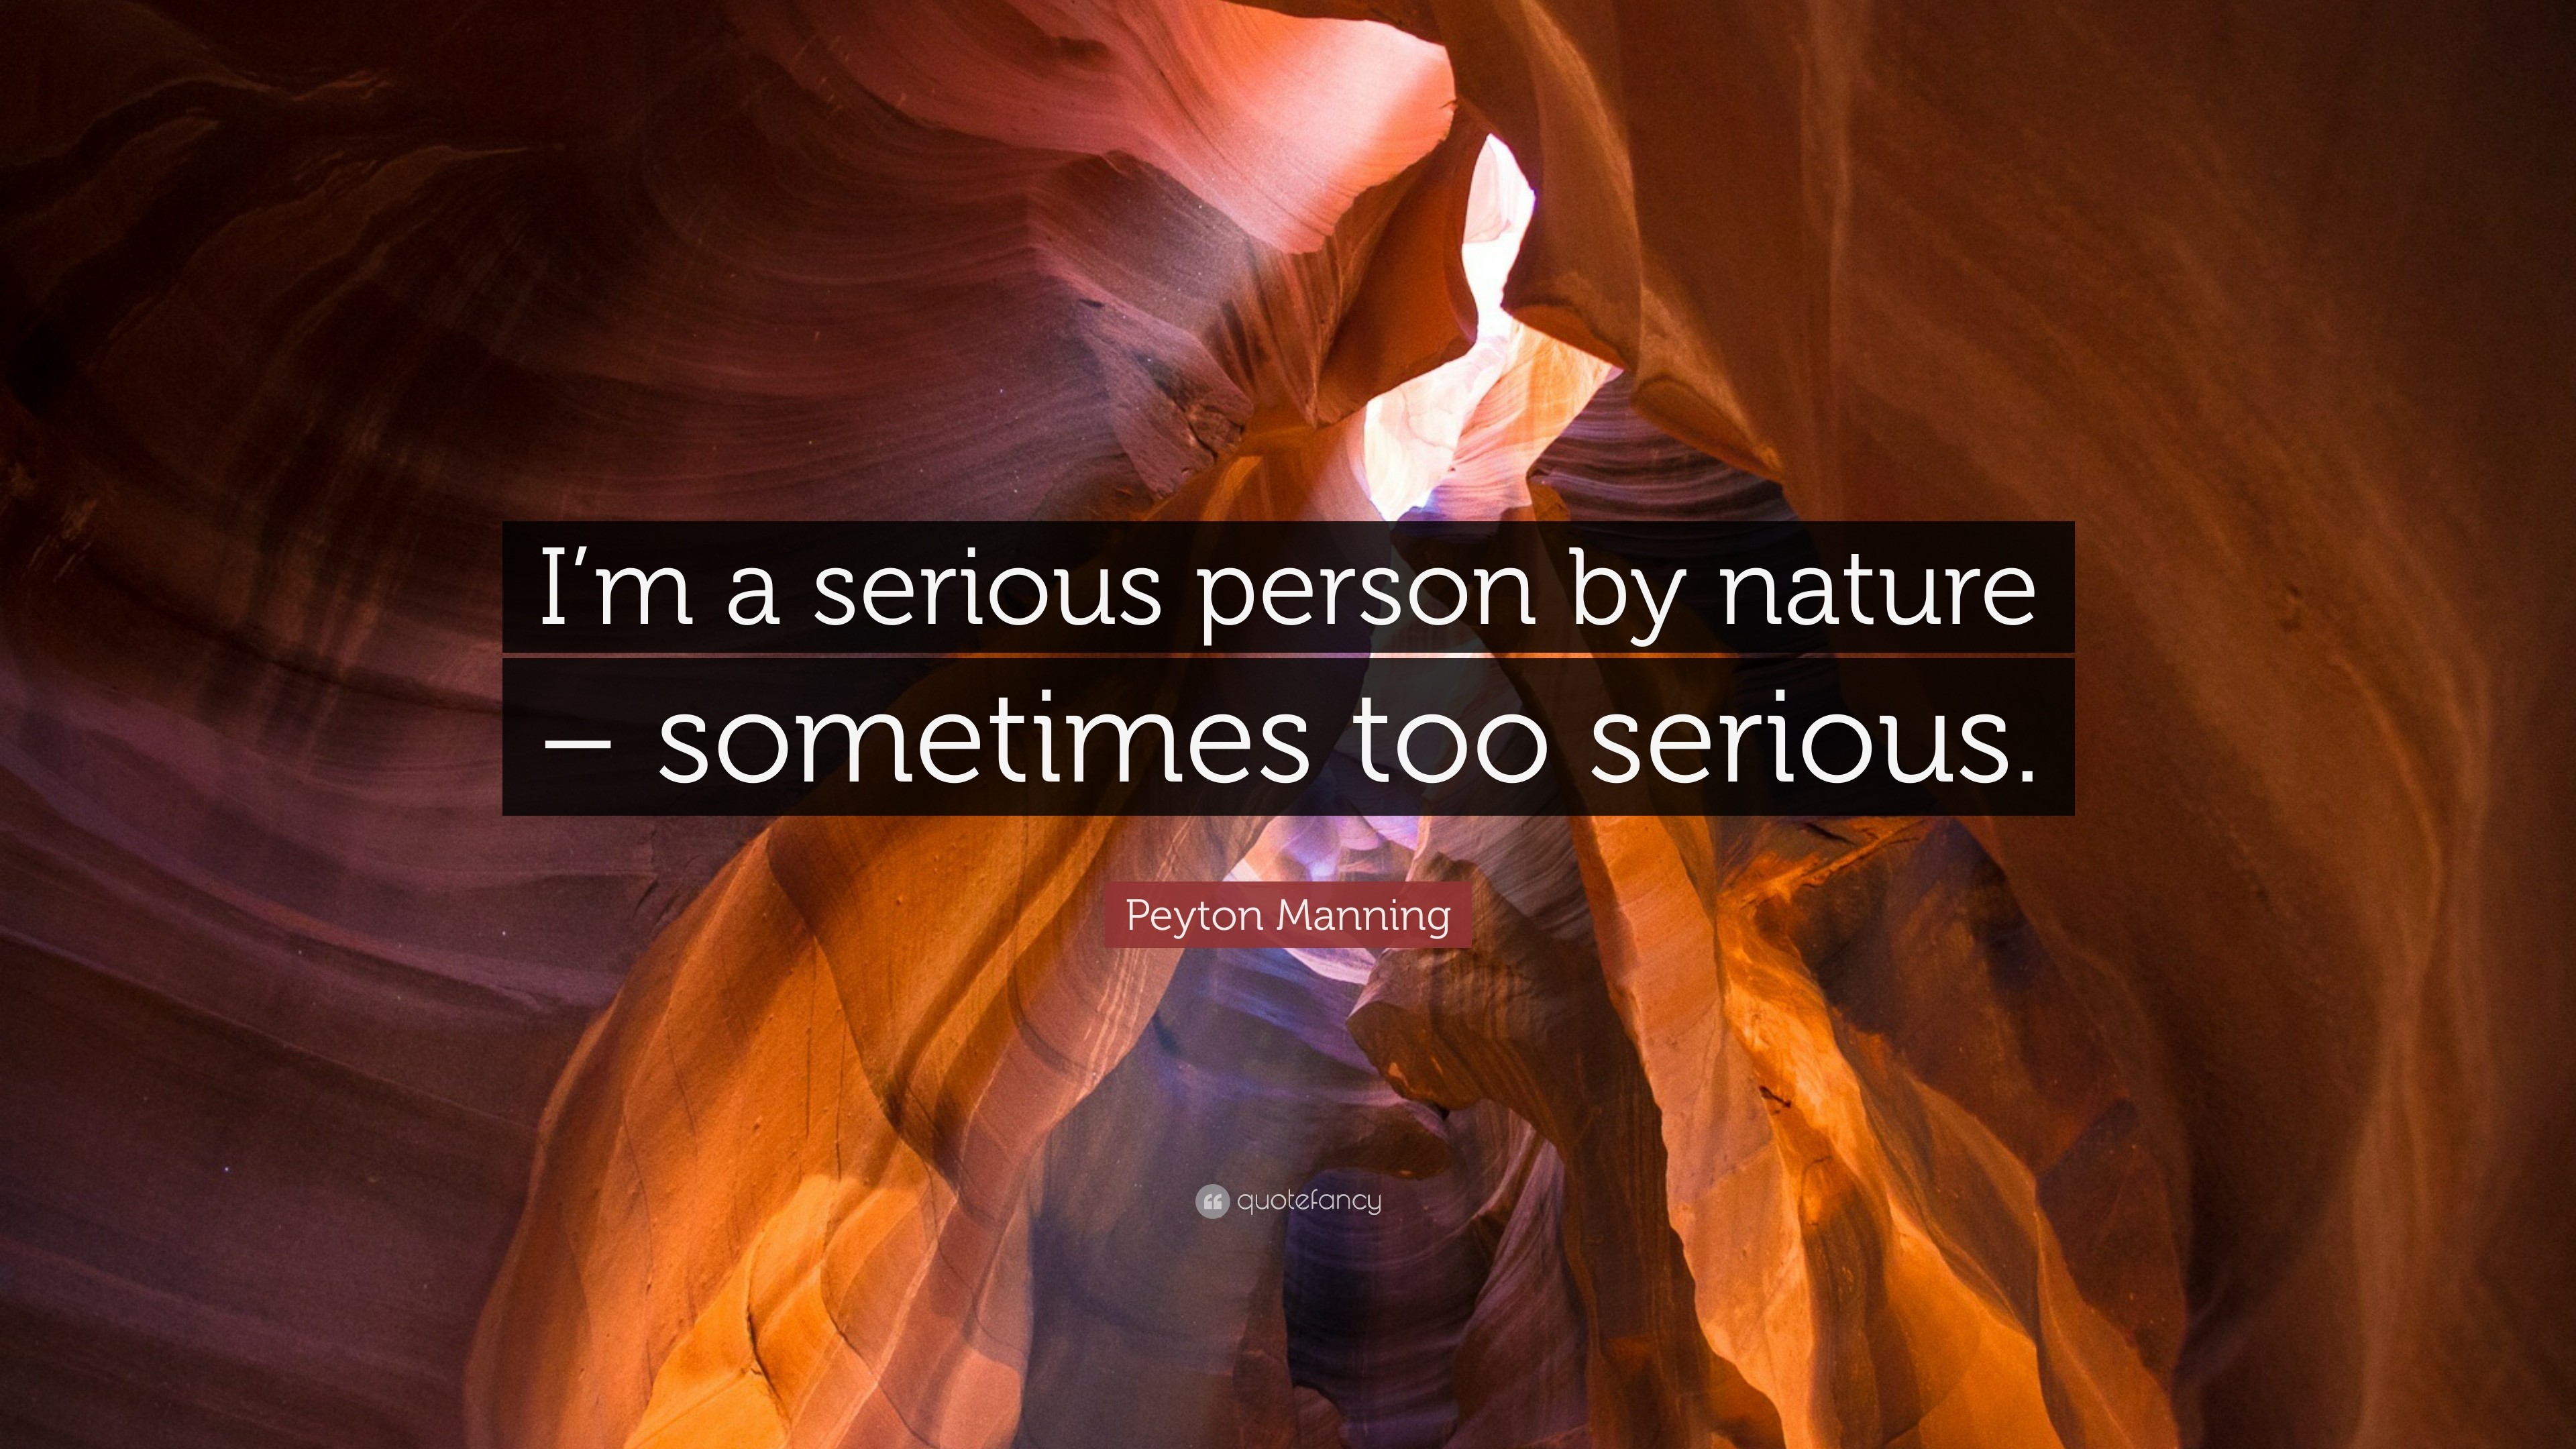 3840x2160 Peyton Manning Quote: “I'm a serious person by nature – sometimes too